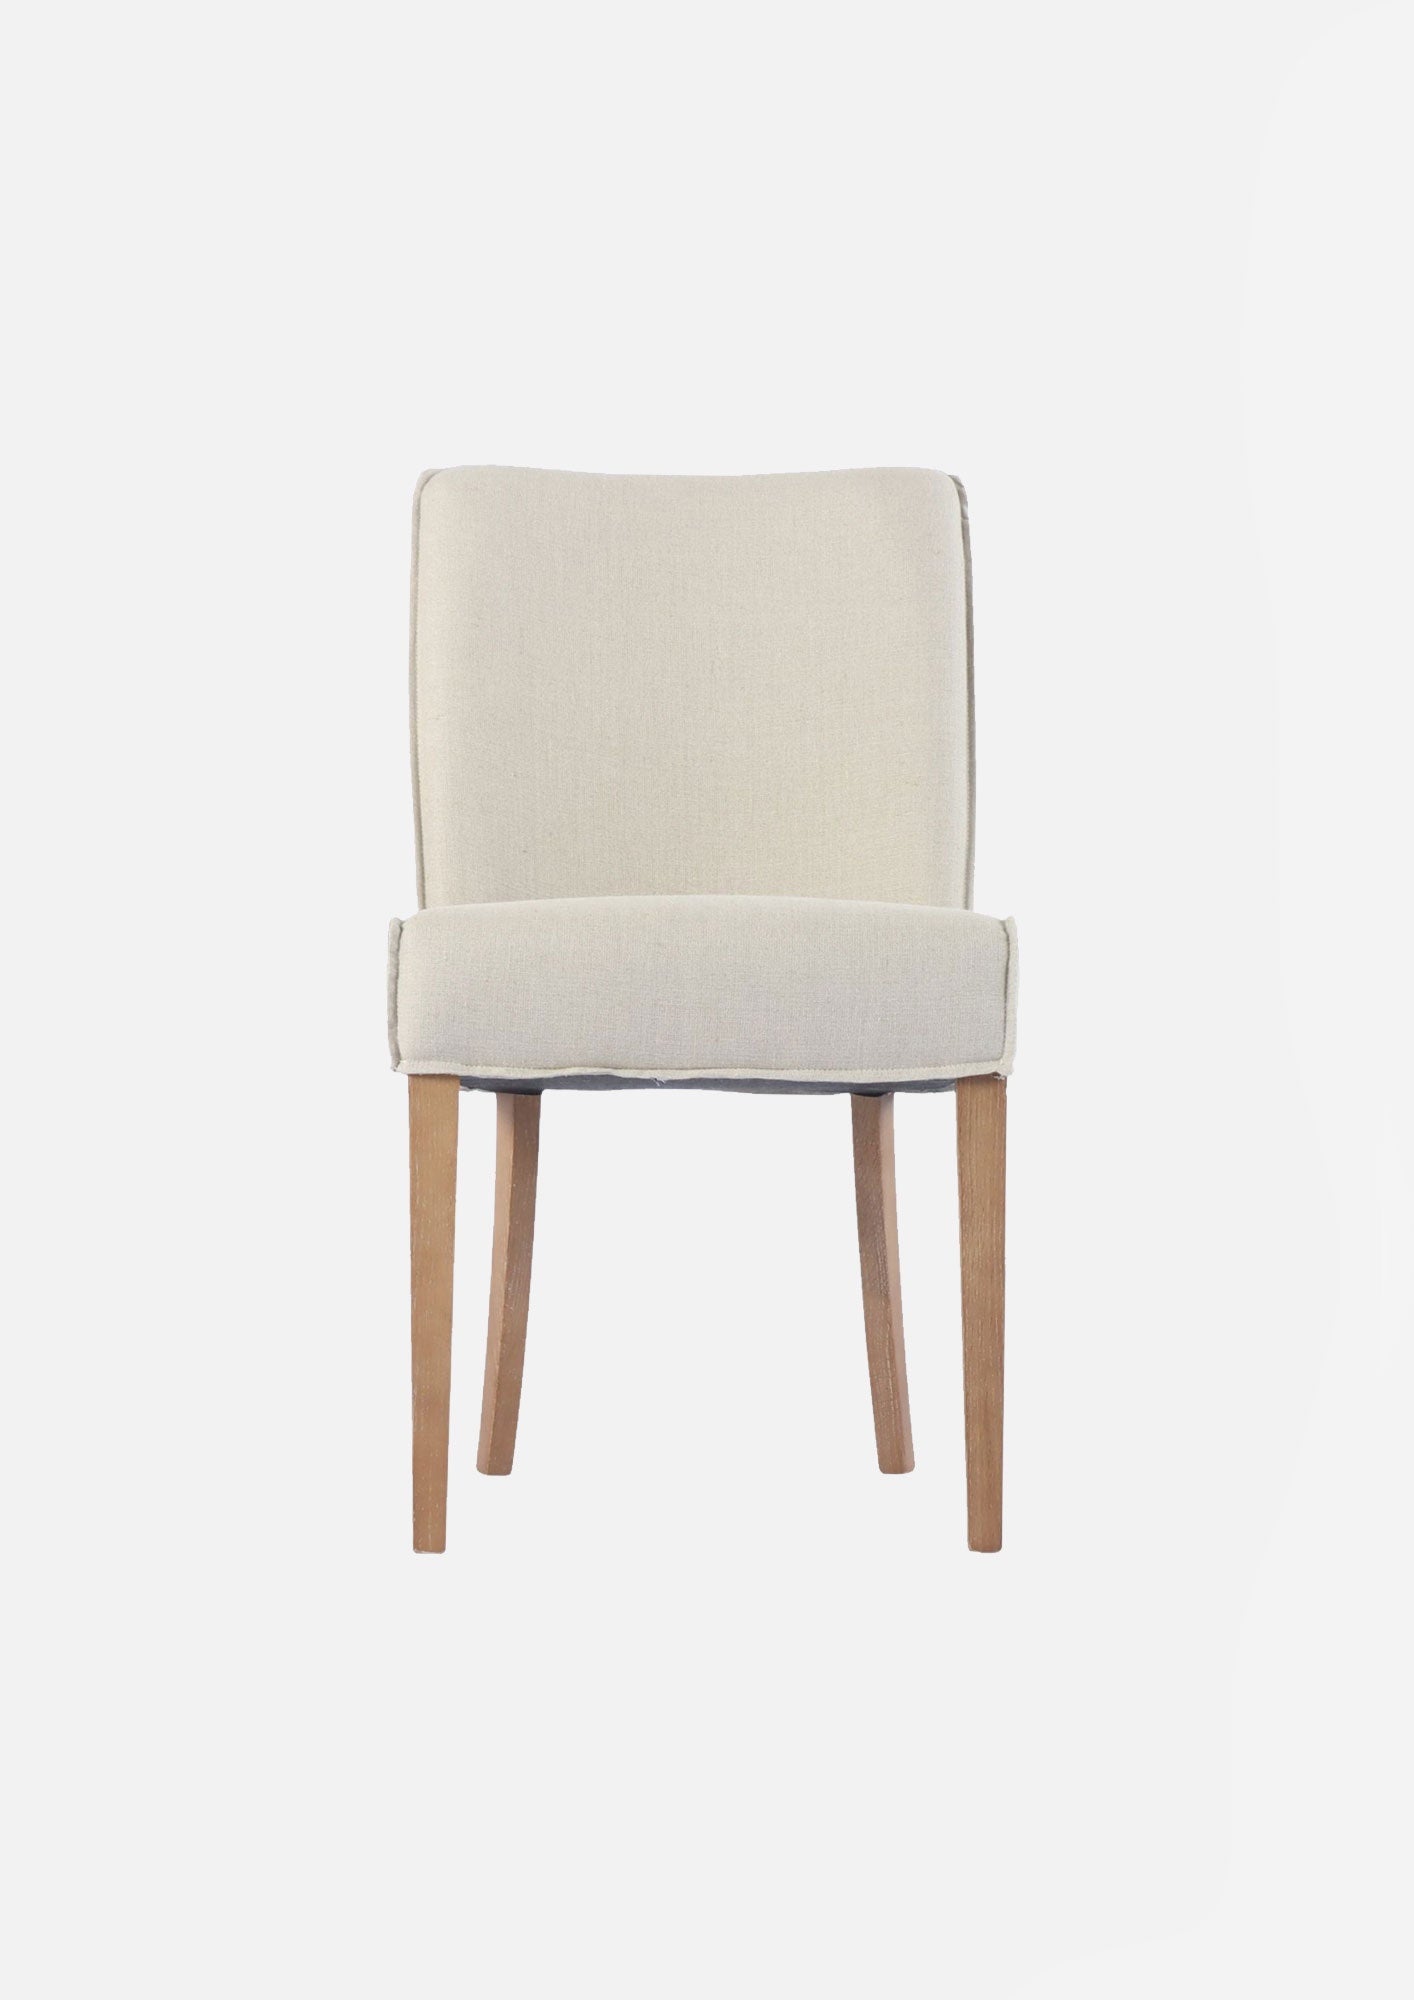 Gracie Dining Chair